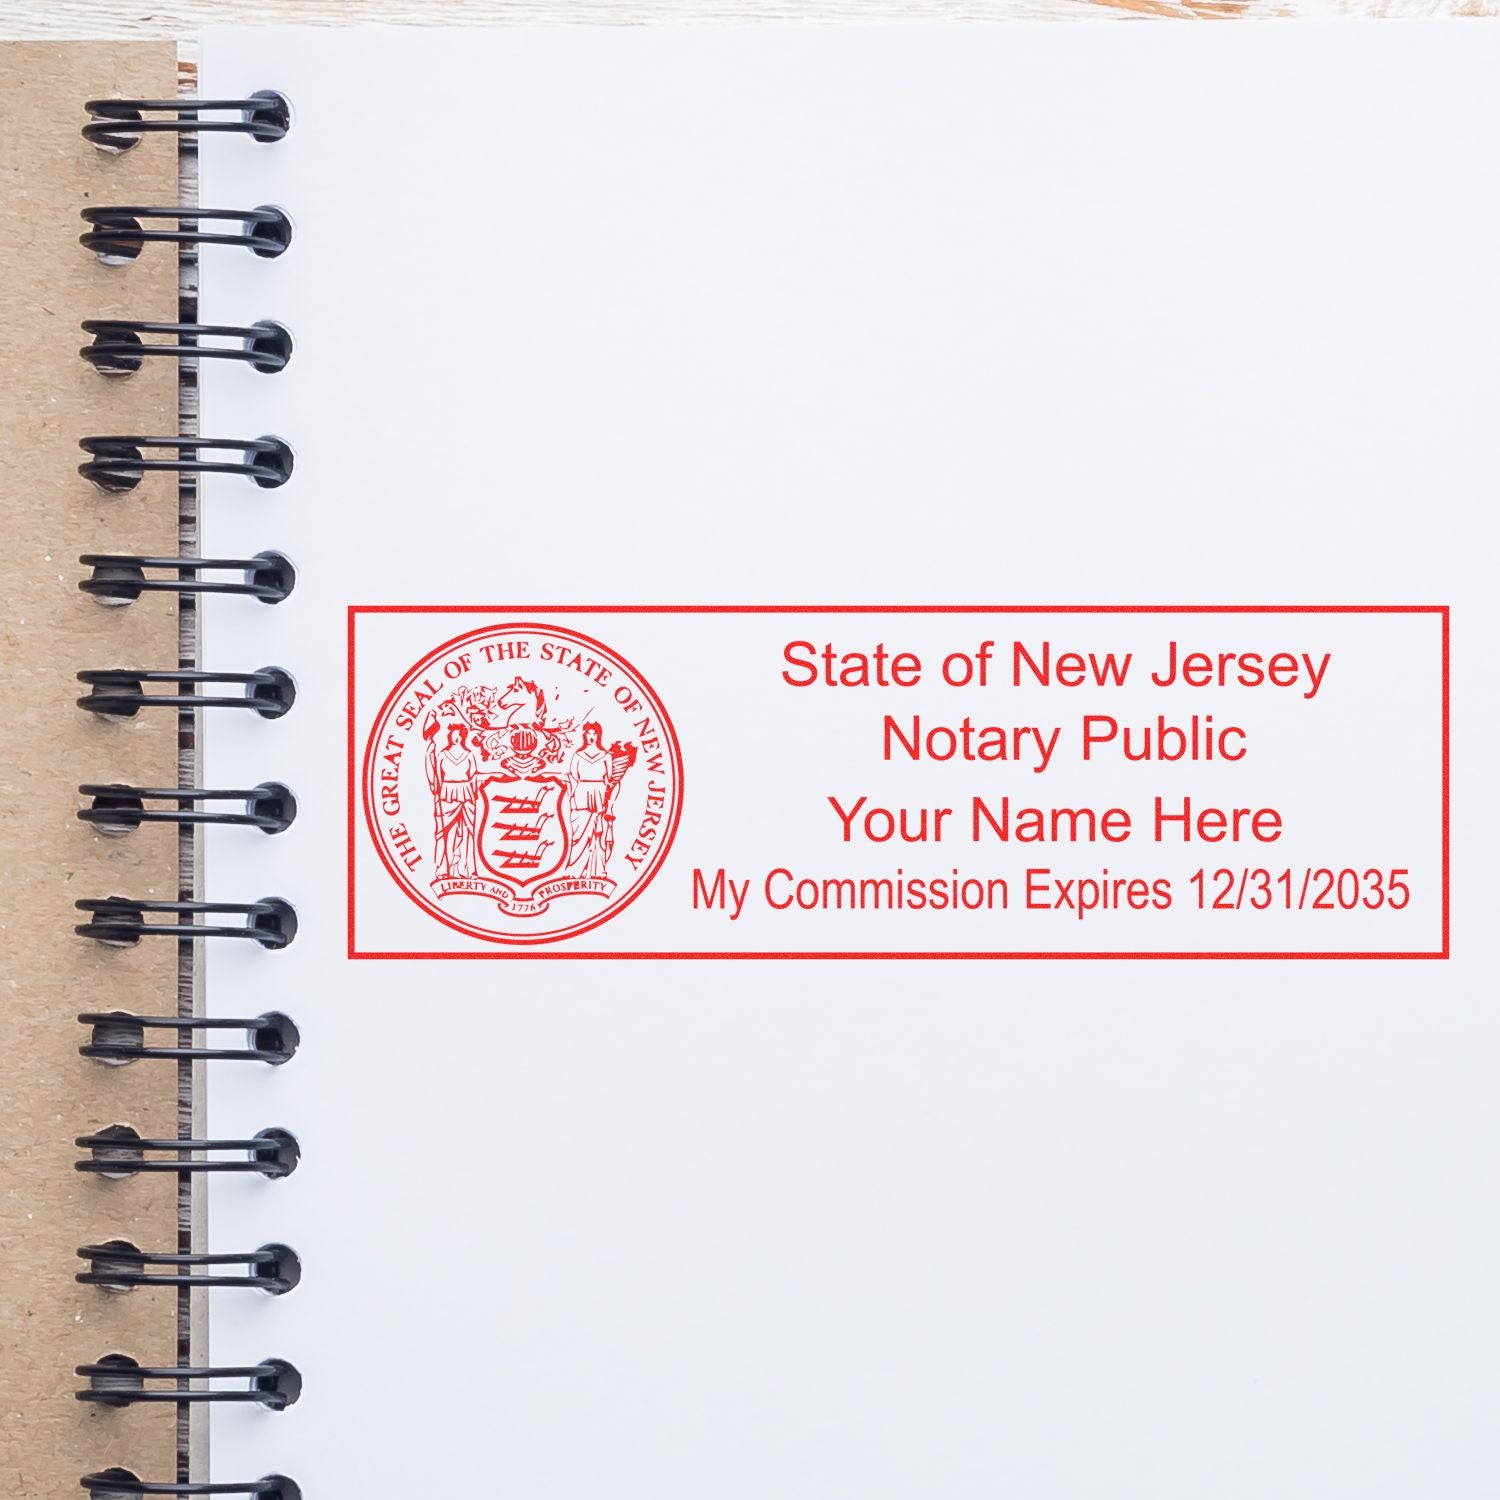 The main image for the PSI New Jersey Notary Stamp depicting a sample of the imprint and electronic files